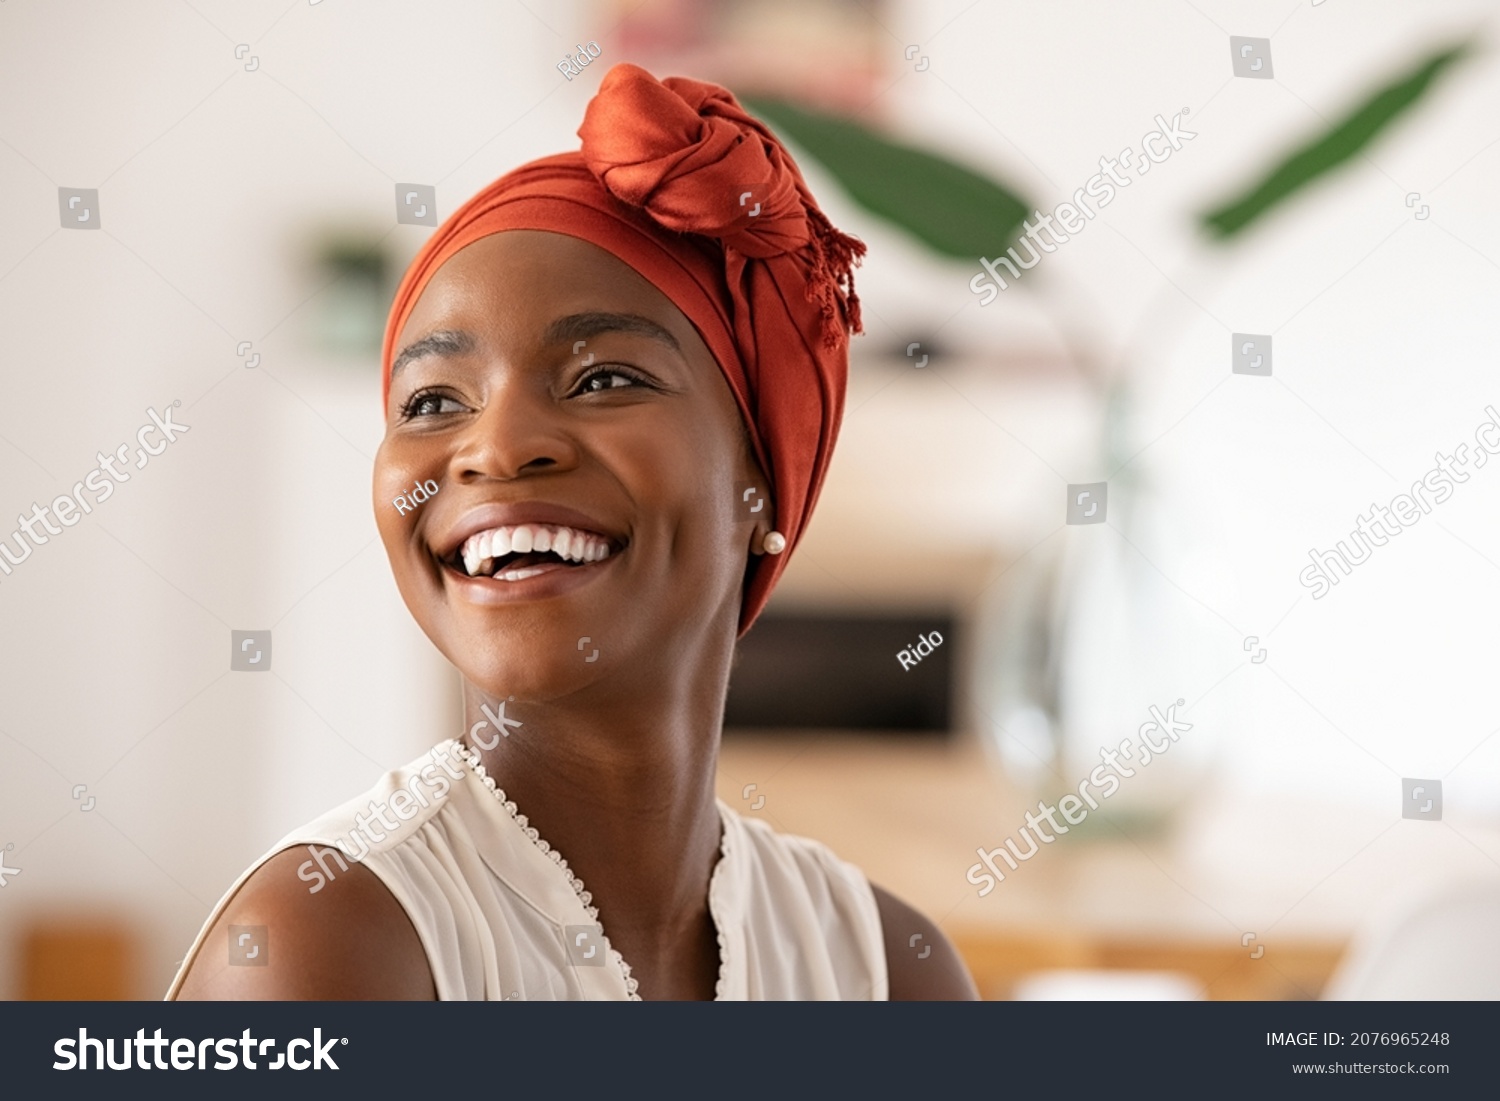 Beautiful mature black woman with african turban relaxing at home. Cheerful middle aged black woman in casual clothing with traditional headscarf at home laughing. African american lady smiling. #2076965248